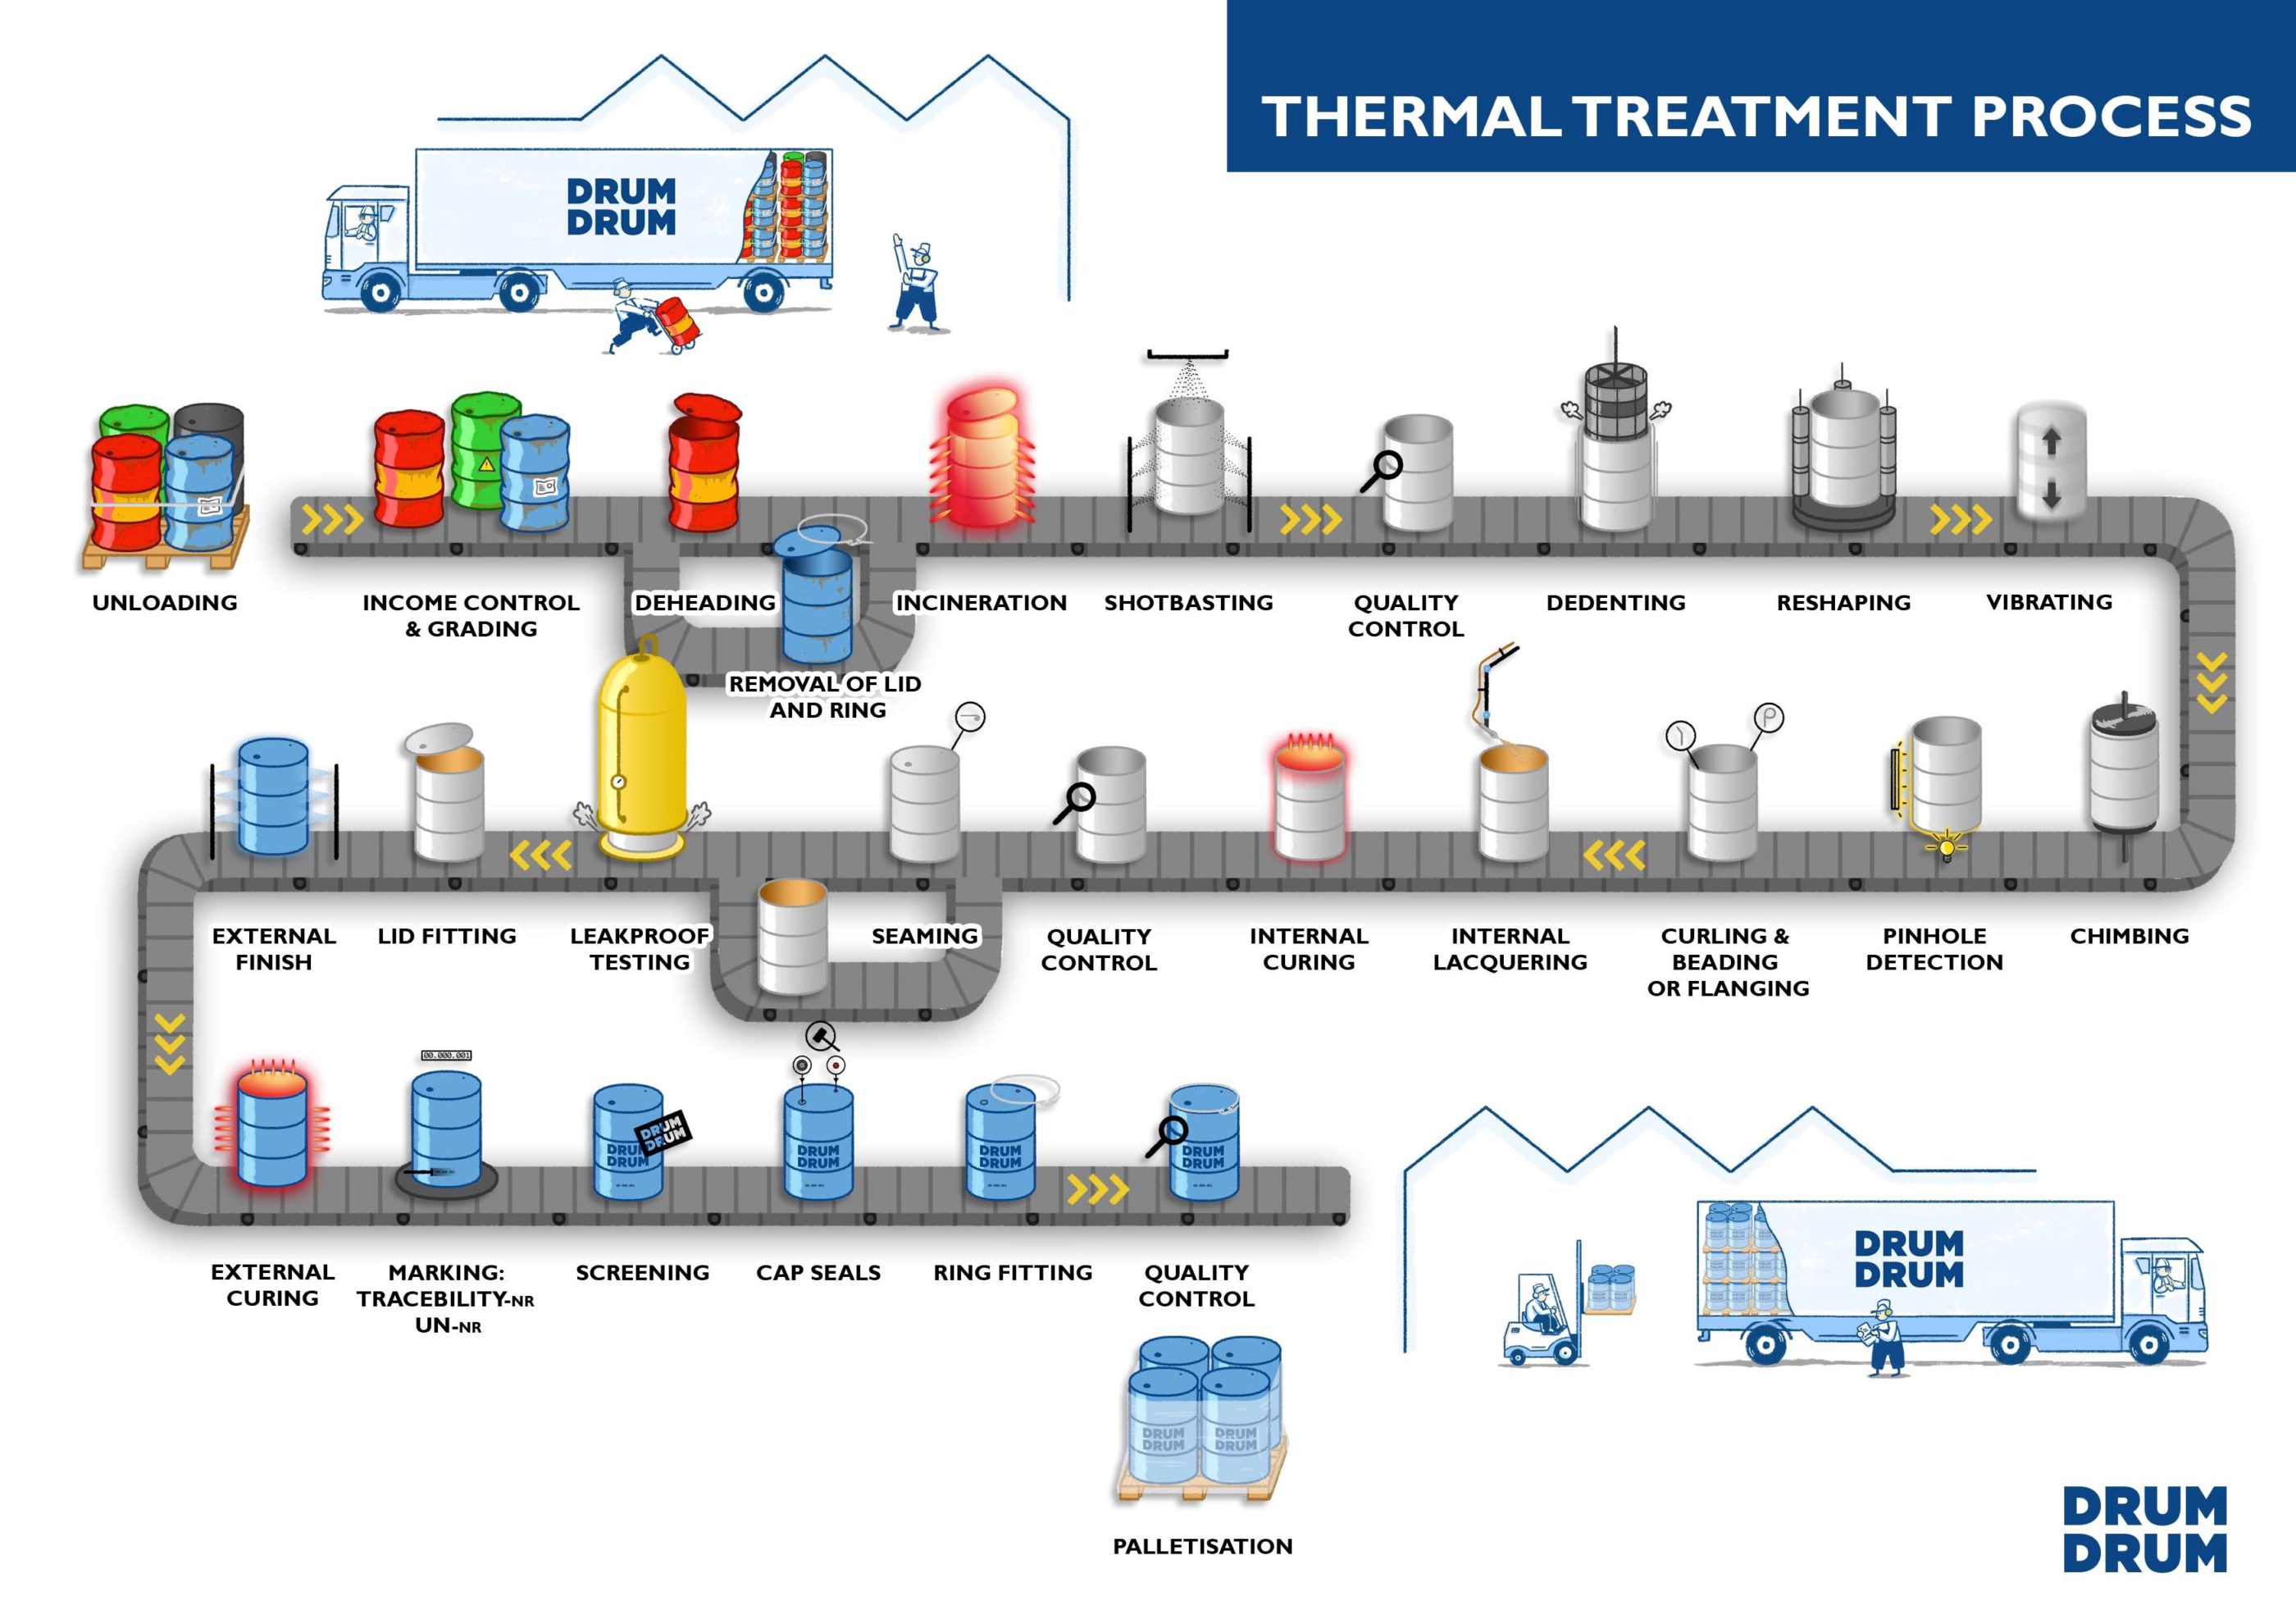 The Thermal Treatment Process